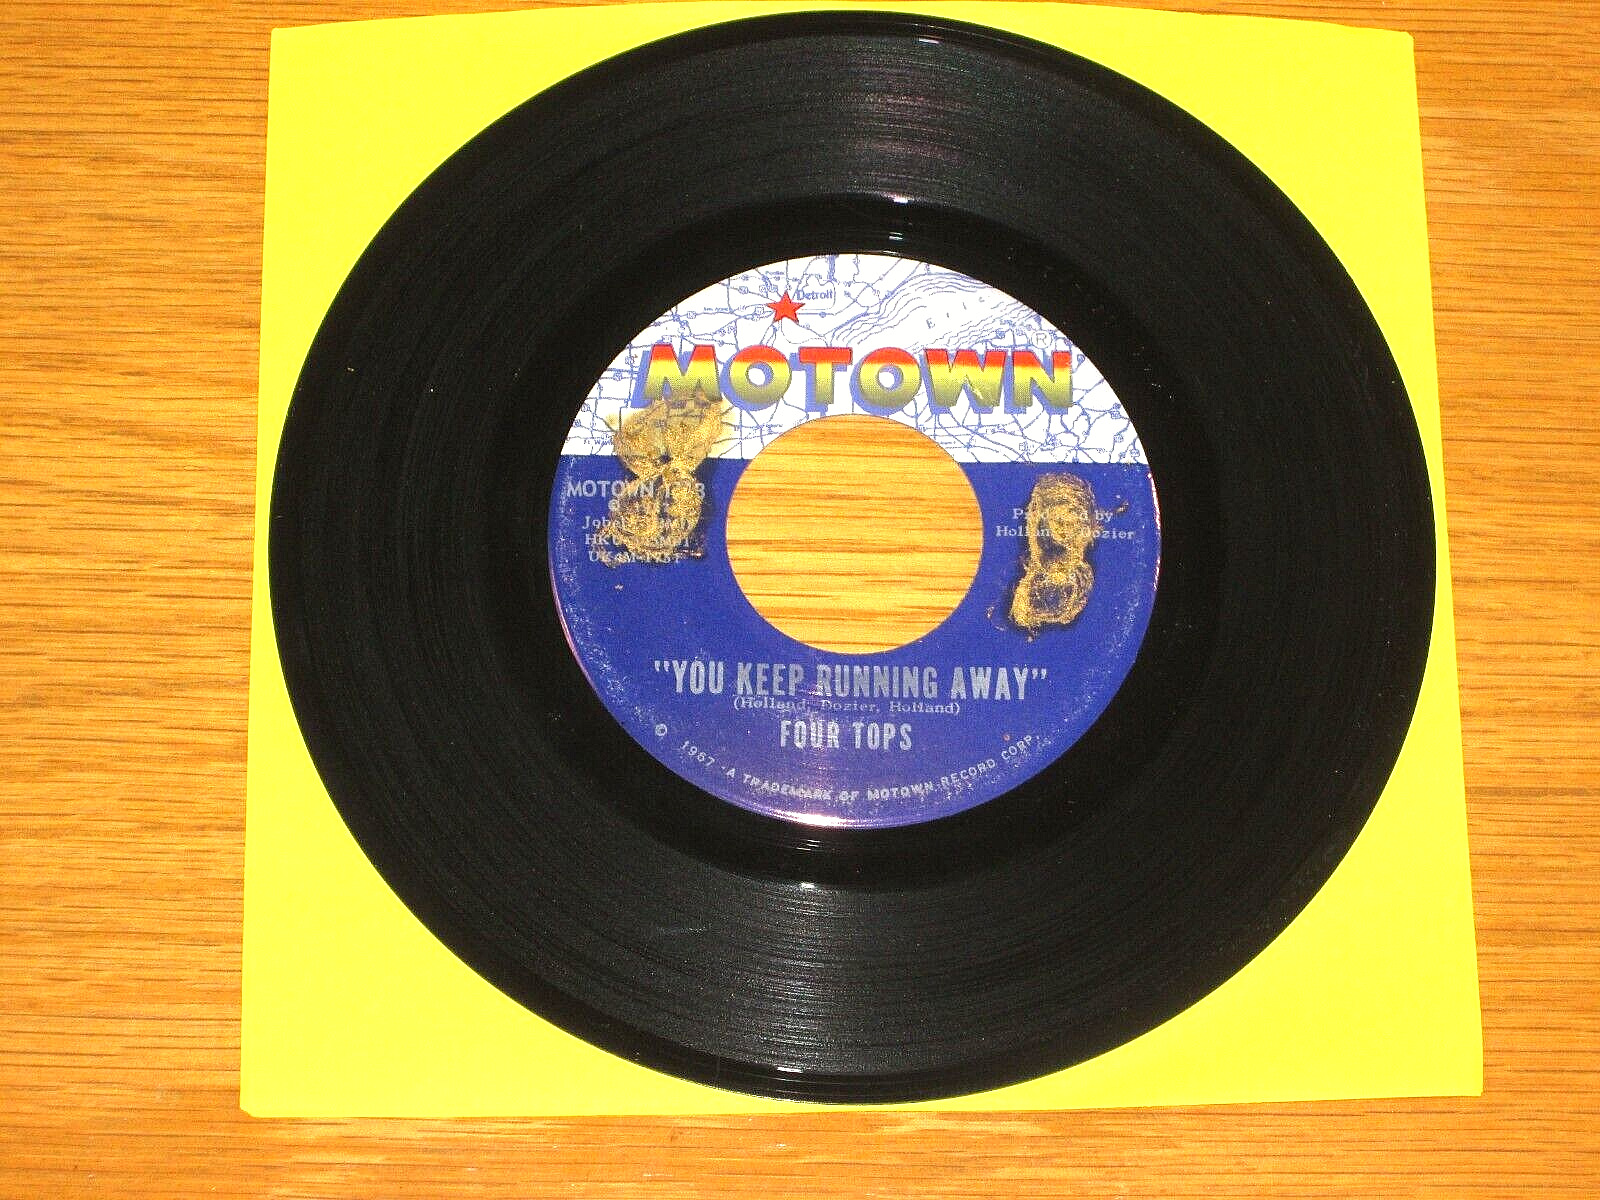 NORTHERN SOUL 45 RPM - FOUR TOPS - MOTOWN 1113 - "YOU KEEP RUNNING AWAY"